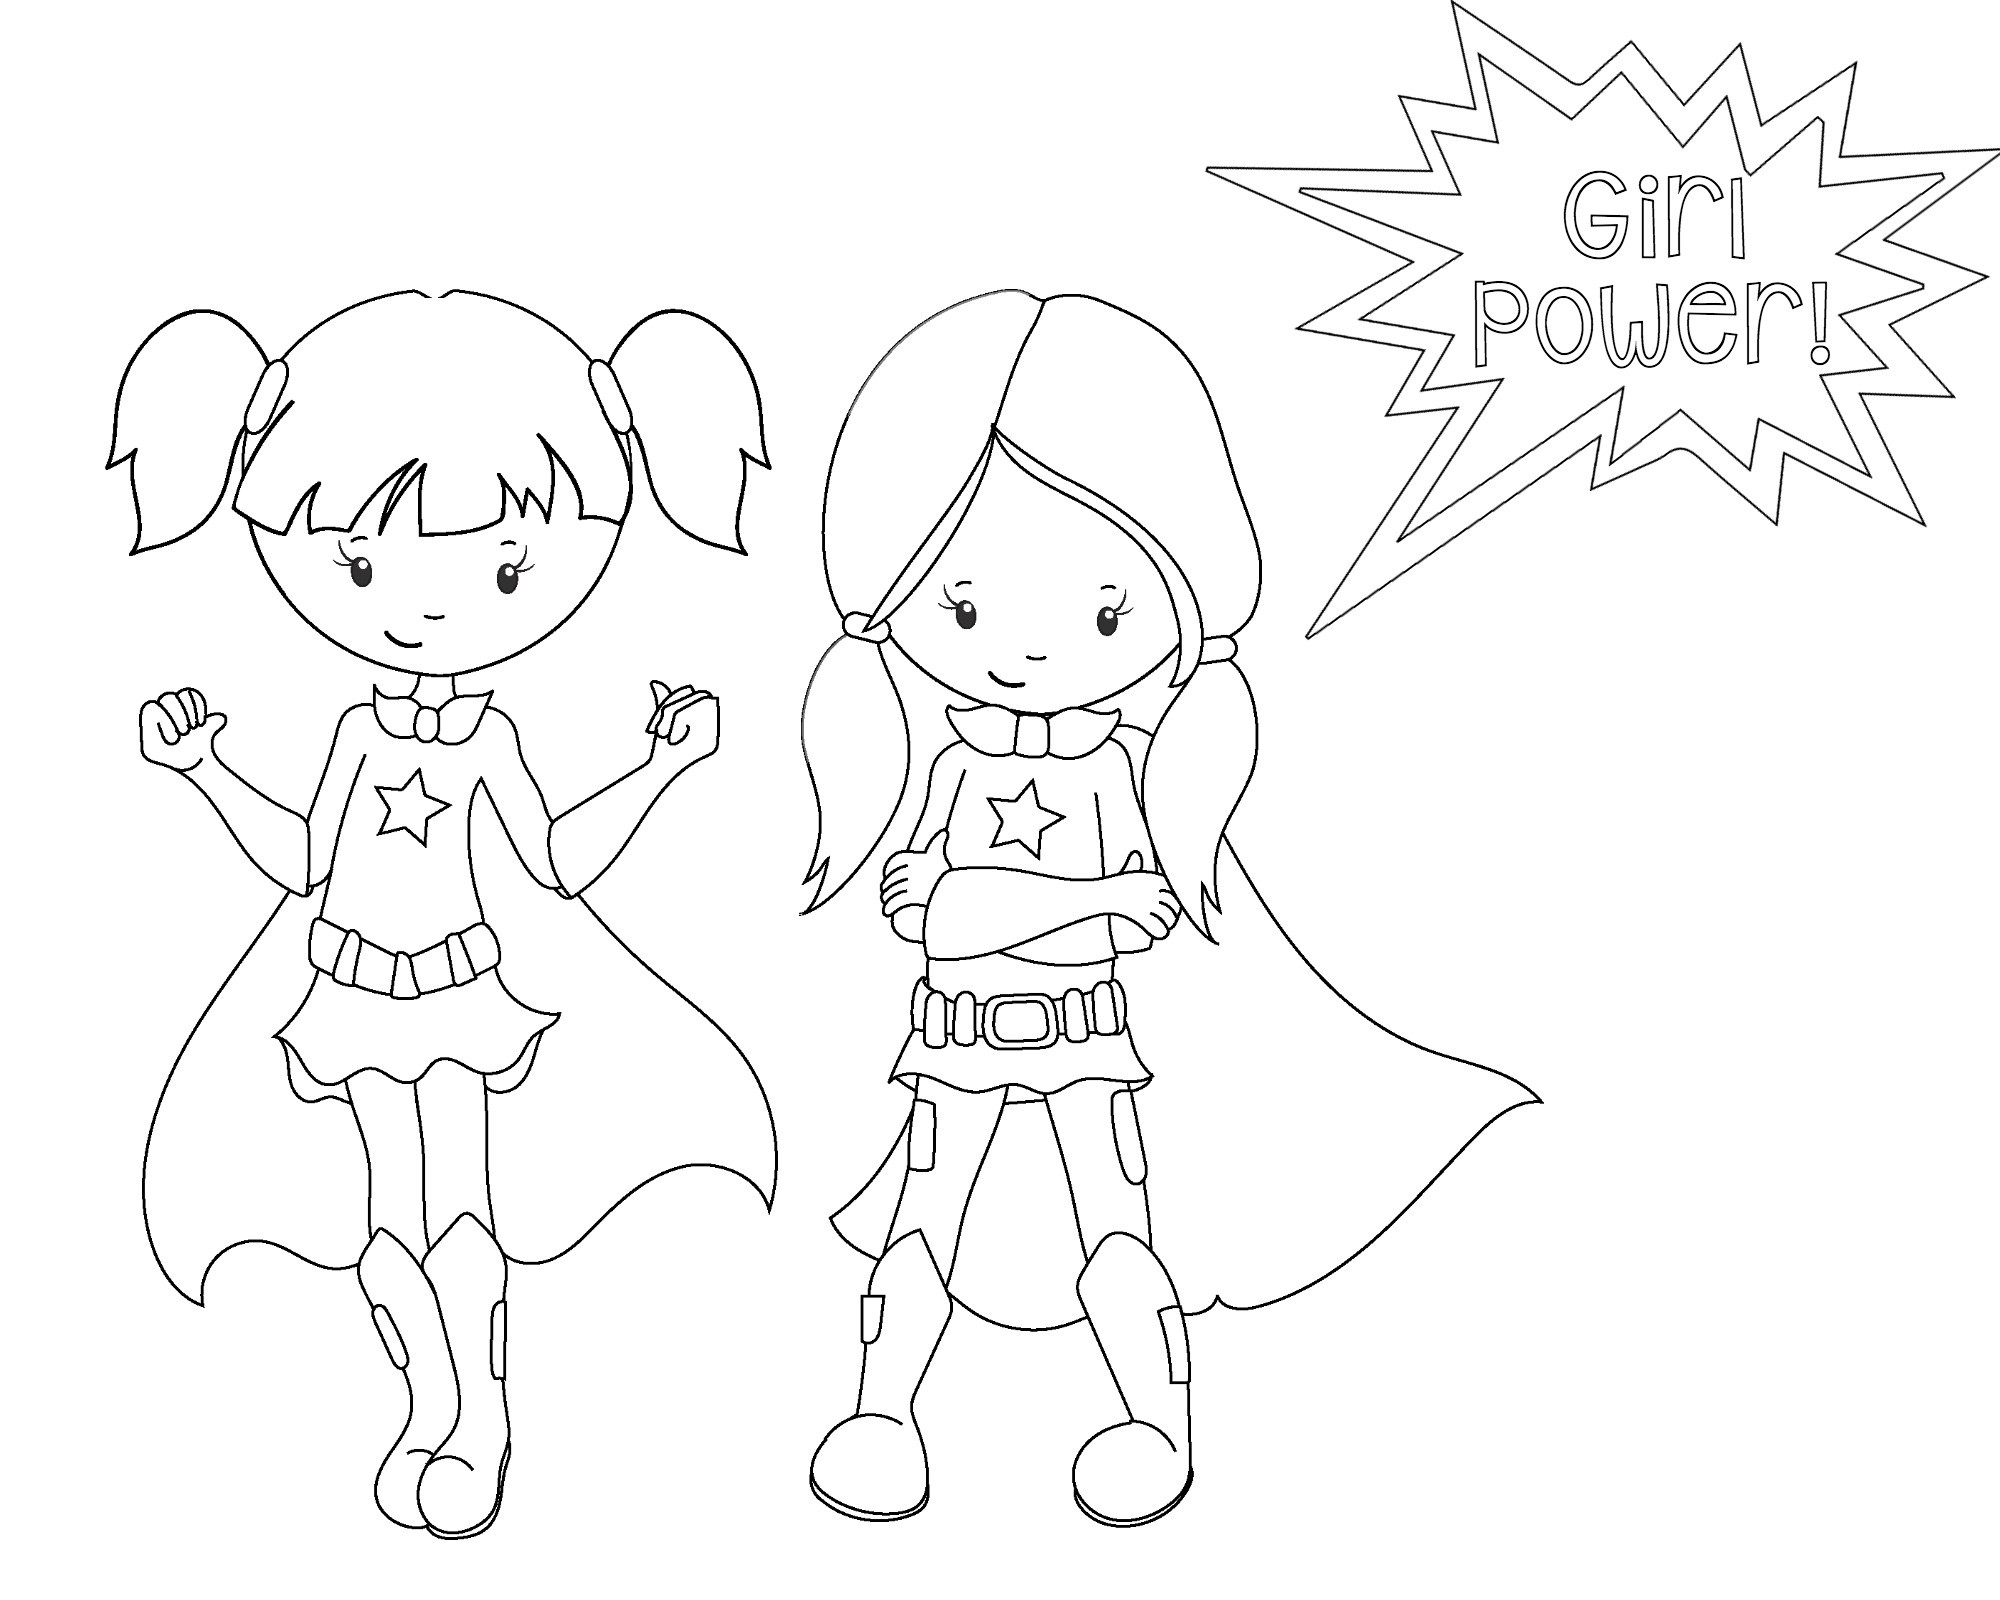 Superhero Girls Coloring Pages
 Superhero Coloring Pages Crazy Little Projects